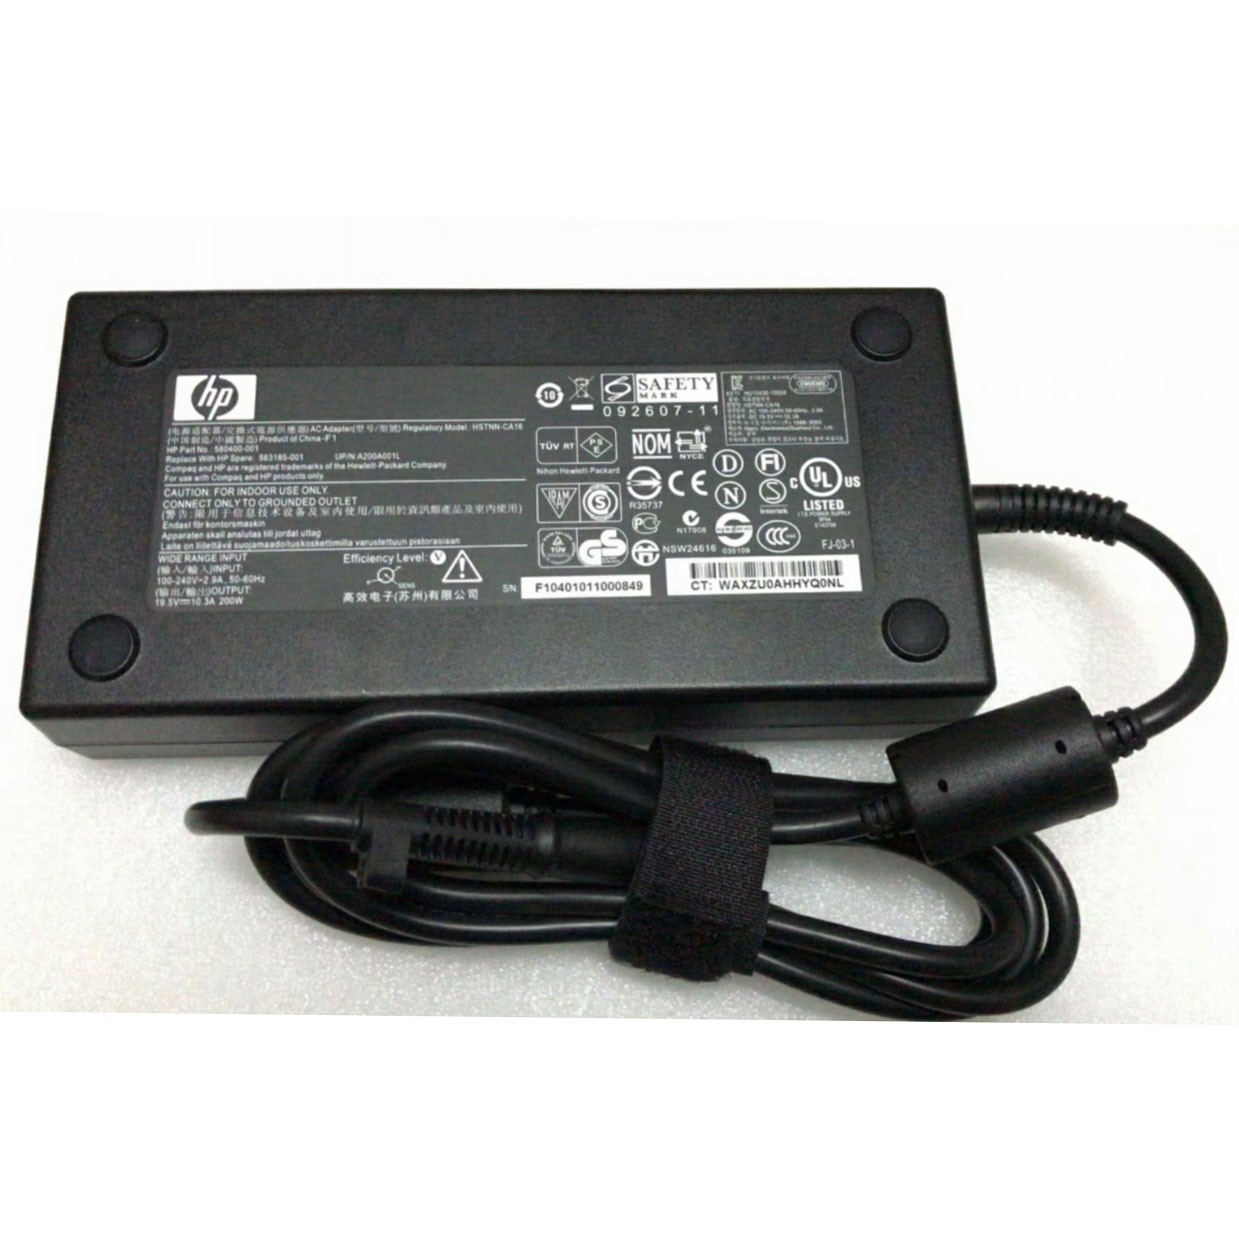 Genuine 200W HP EliteBook 8560w Series Power Supply Adapter Charger Laptop Power Supply Adapter Cord